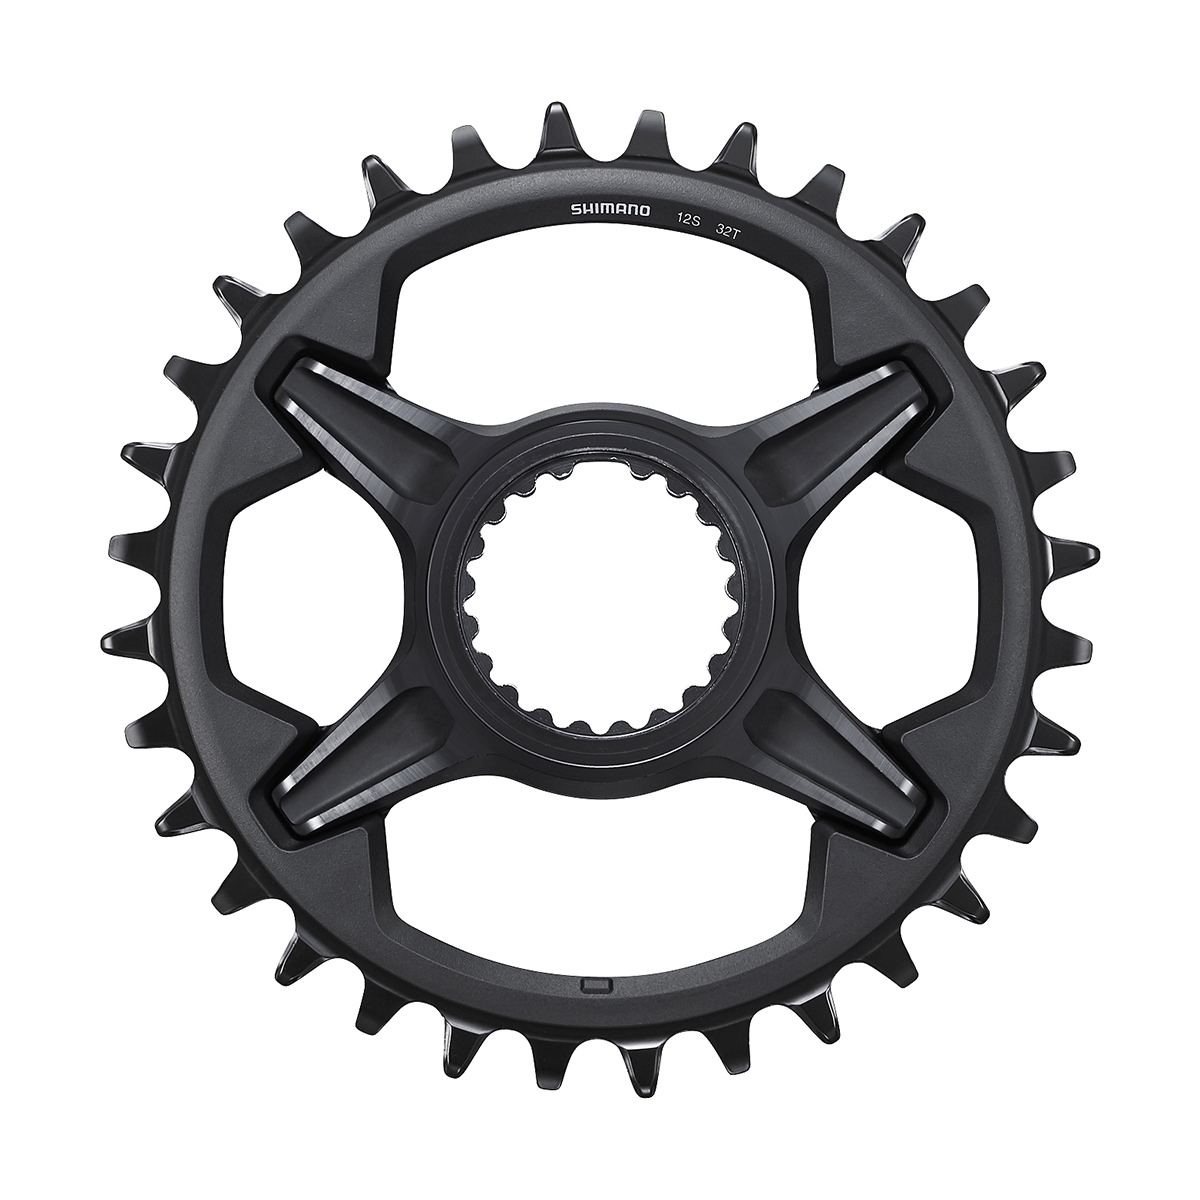 Chainring 32t SM-CRM85 for Deore XT FC-M8100-1 12 speed 2020